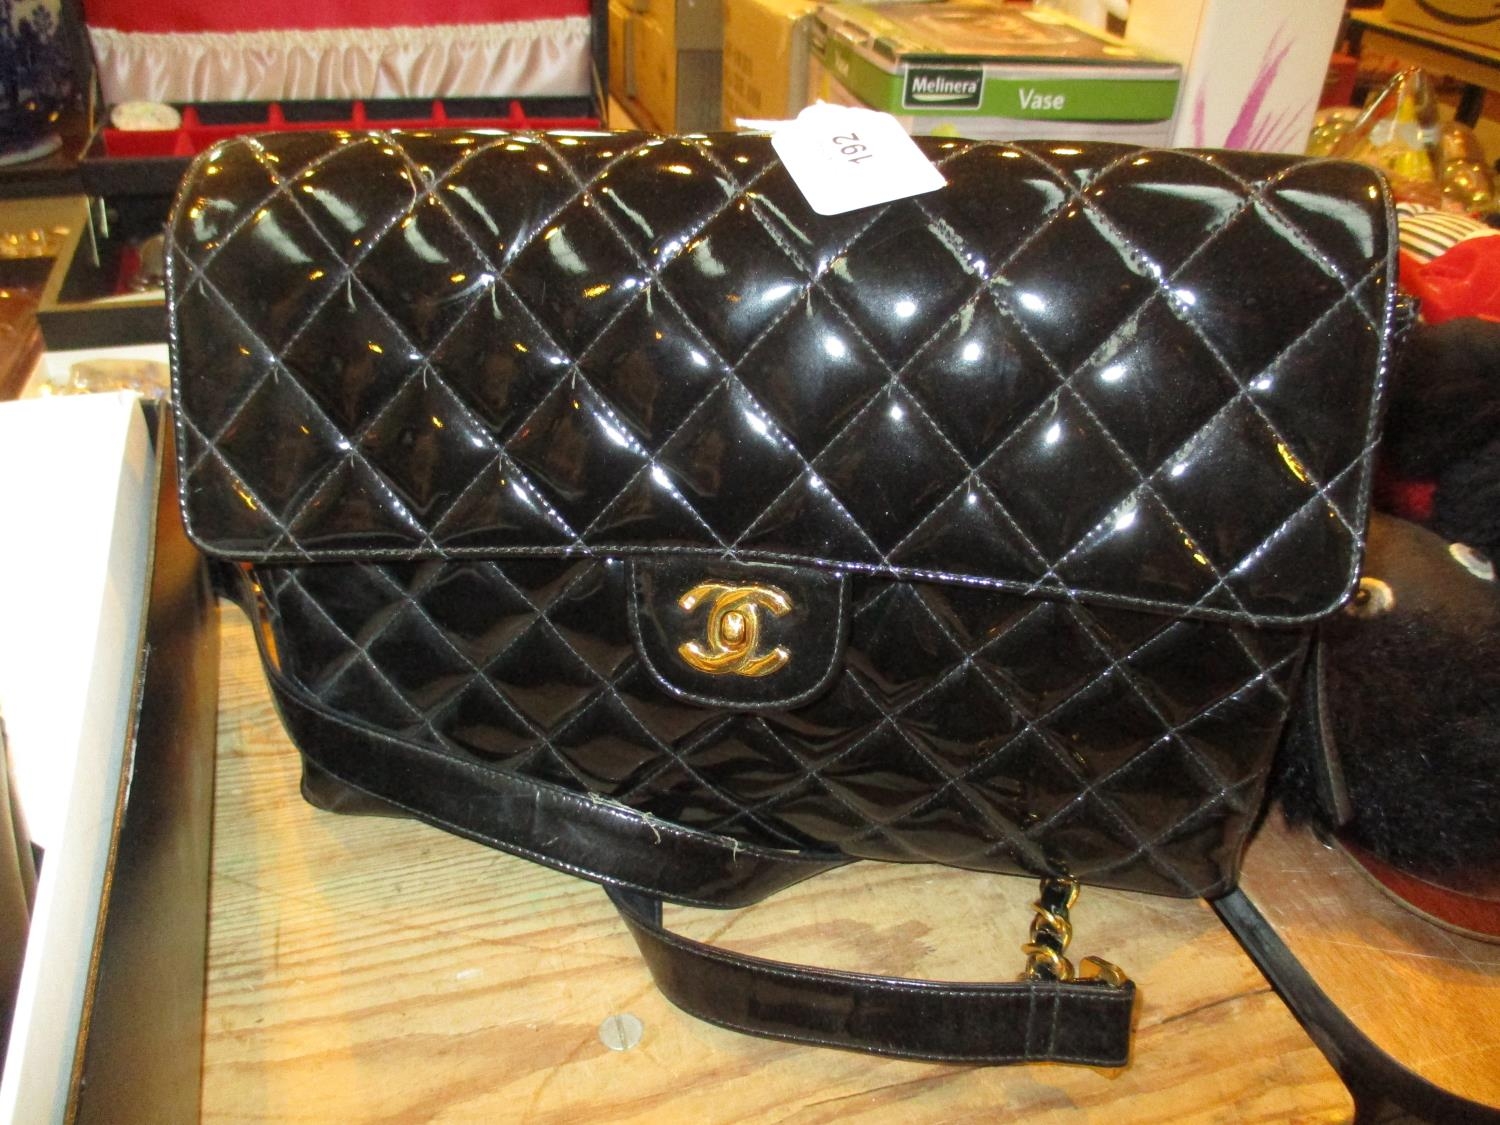 Handbag Bearing Chanel Logo, with Dust Bag and Internal Sticker Number 3973354